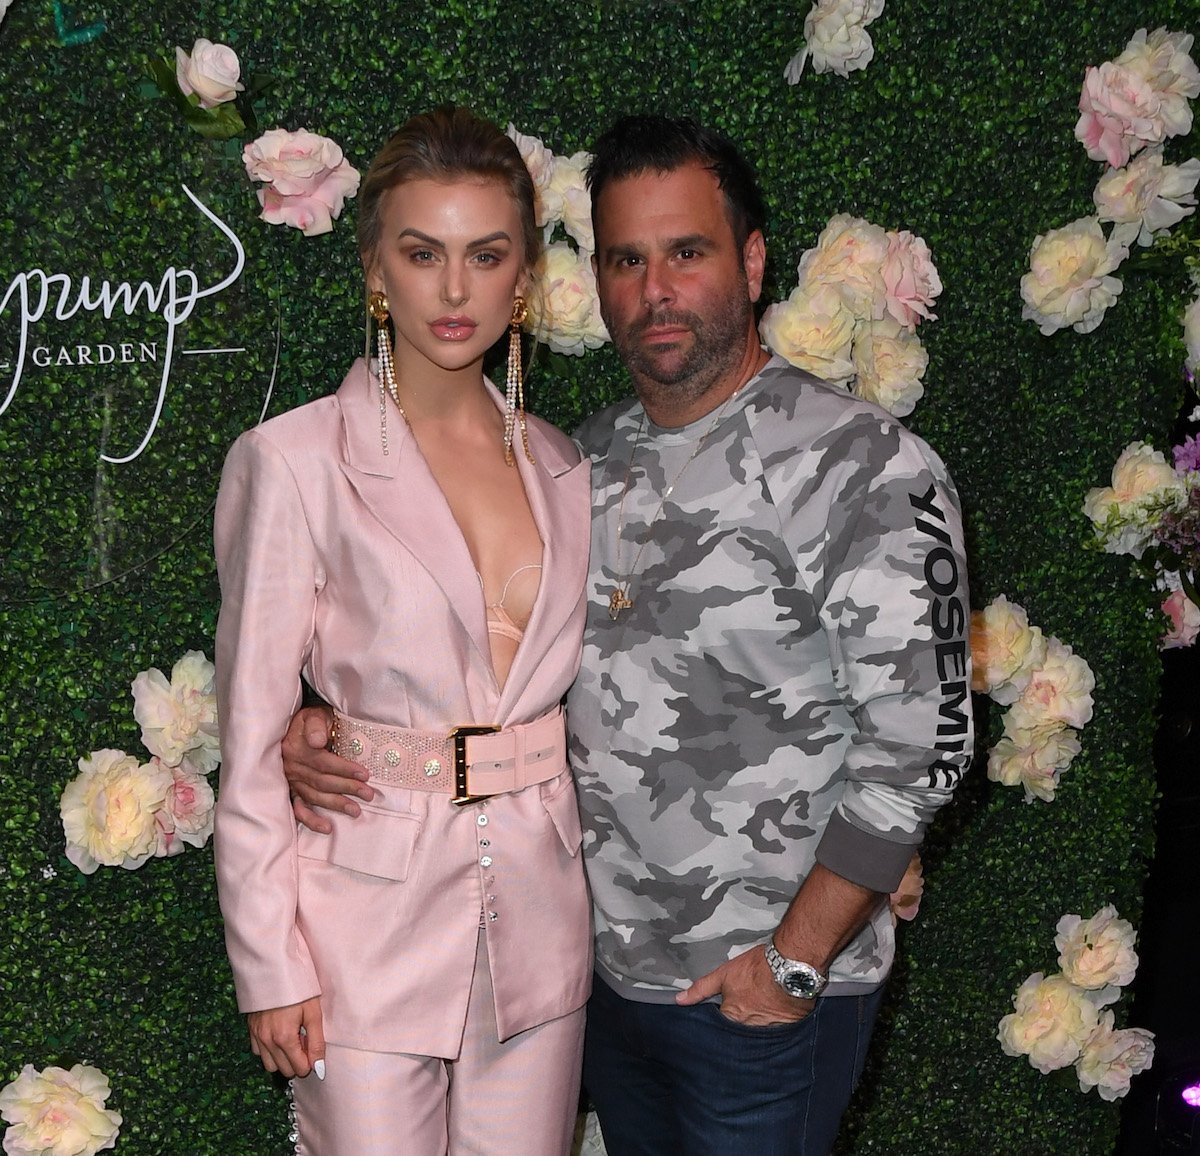 Lala Kent and Randall Emmett pose together at an event.